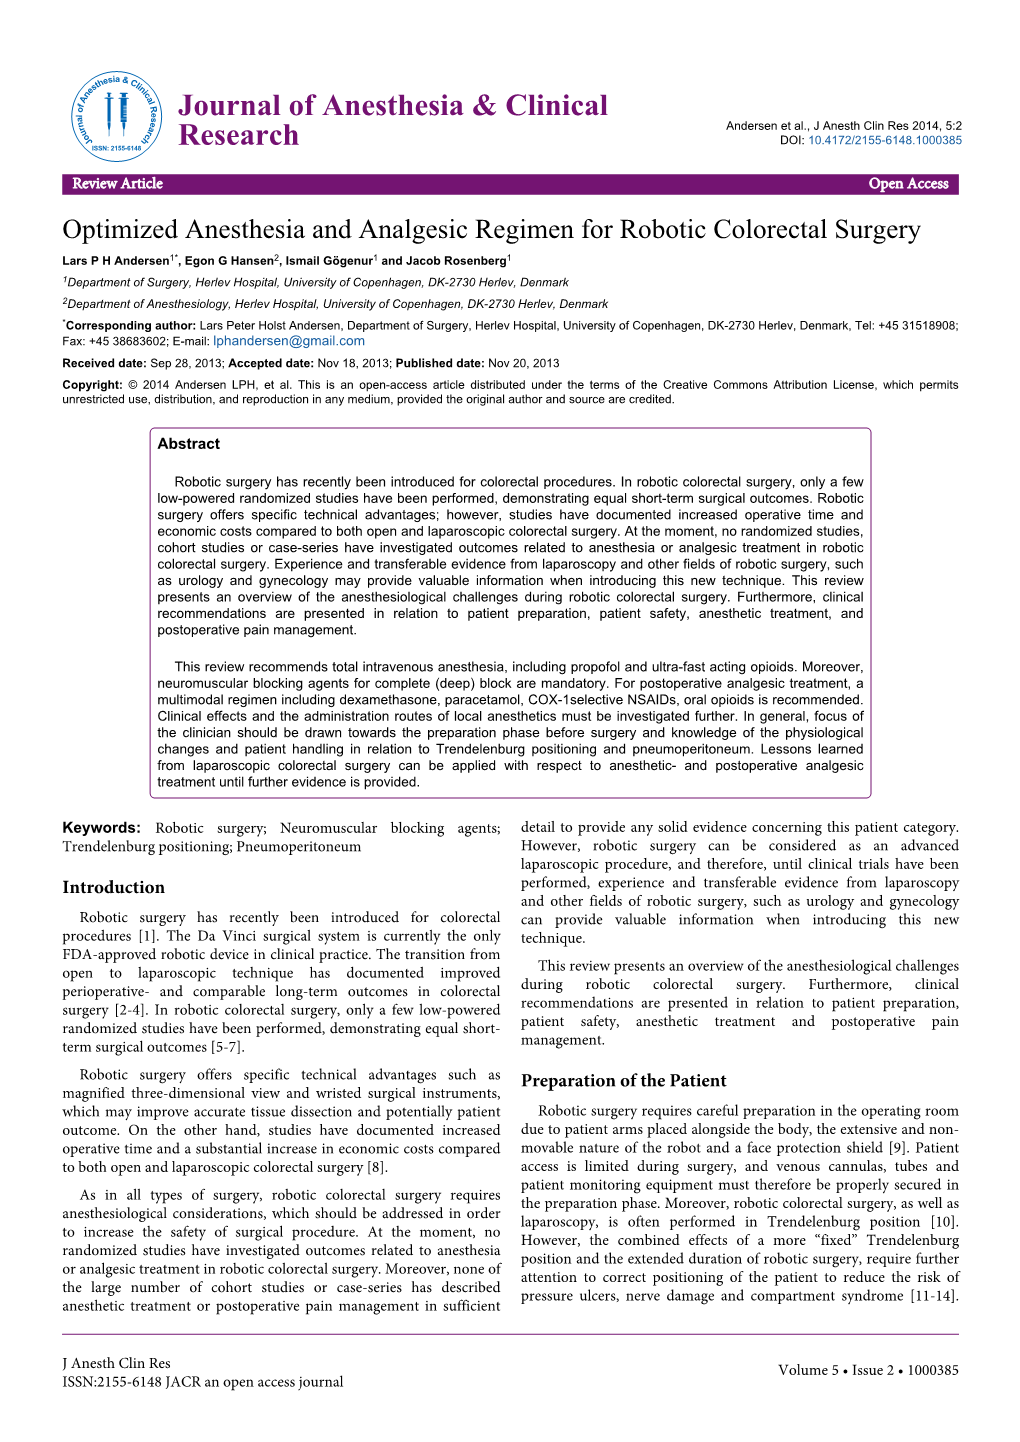 Optimized Anesthesia and Analgesic Regimen for Robotic Colorectal